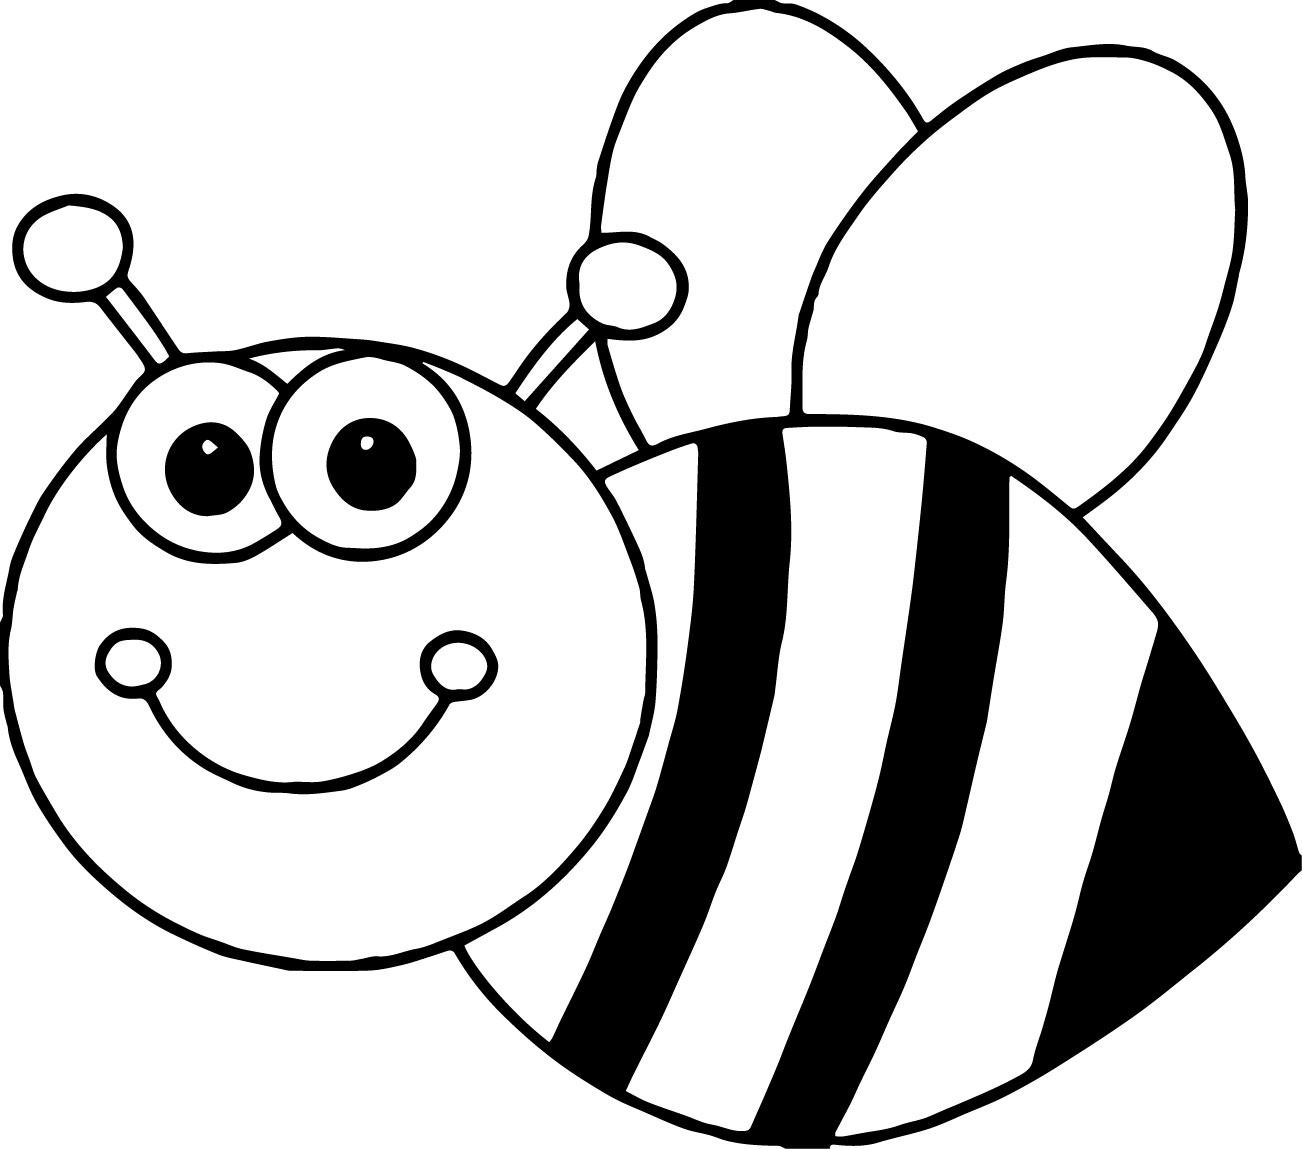 Bumble Bee Coloring Page Sheets Draw Bumble Bee Coloring Pages 